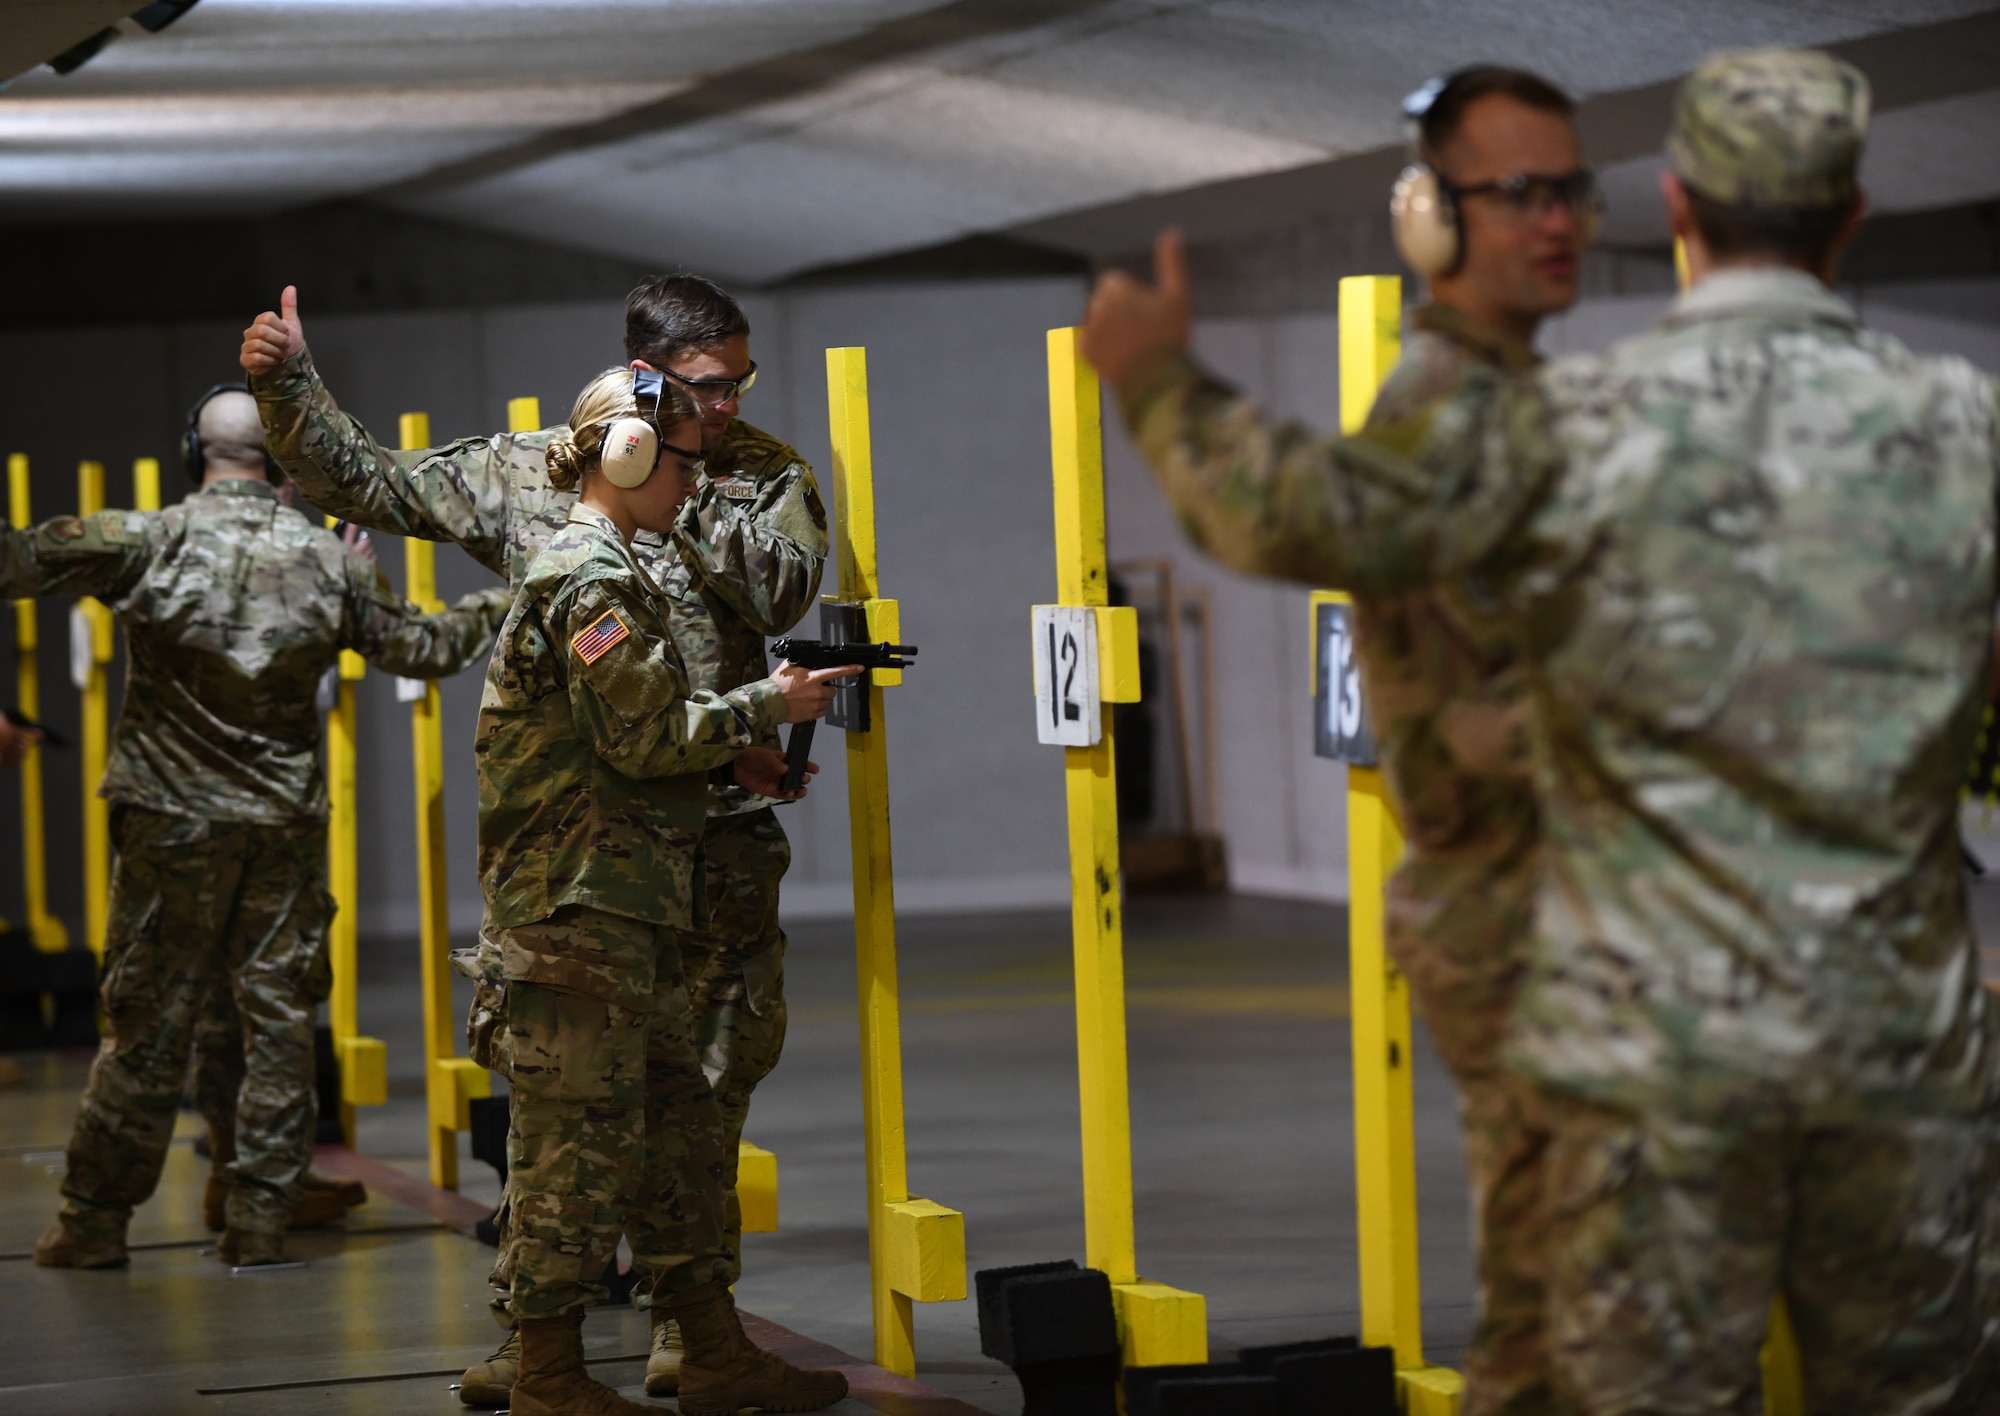 Tech. Sgt. Jason Smith, a 28th Security Forces Squadron unit training manager, assists an Army ROTC cadet during the pistol qualification portion of the German Armed Forces Proficiency Test at the Combat Arms and Maintenance facility at Ellsworth Air Force Base, S.D., Sept. 21, 2019. Smith, who was the liaison between Ellsworth Airmen and the Army ROTC program at the South Dakota School of Mines and Technology, was one of the 11 Airmen whom competed for the coveted German Armed Forces Proficiency Badge. (U.S. Air Force Photo by Airman 1st Class Christina Bennett)